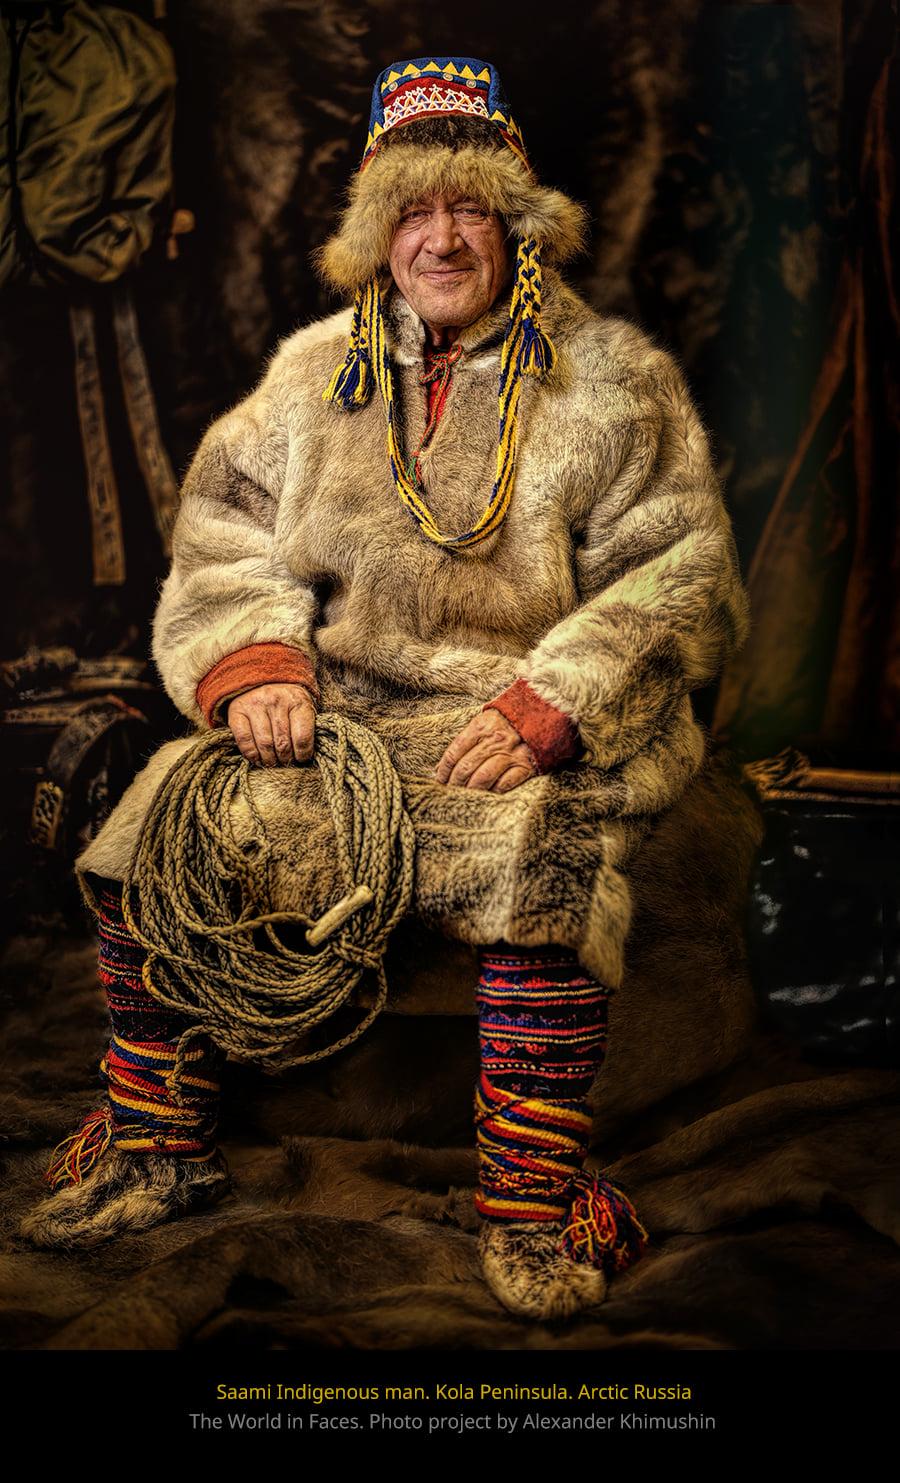 A Kola Peninsula Saami indigenous man in traditional clothing (© <a href="https://www.facebook.com/xperimenter">Alexander Khimushin</a> / The World In Faces)